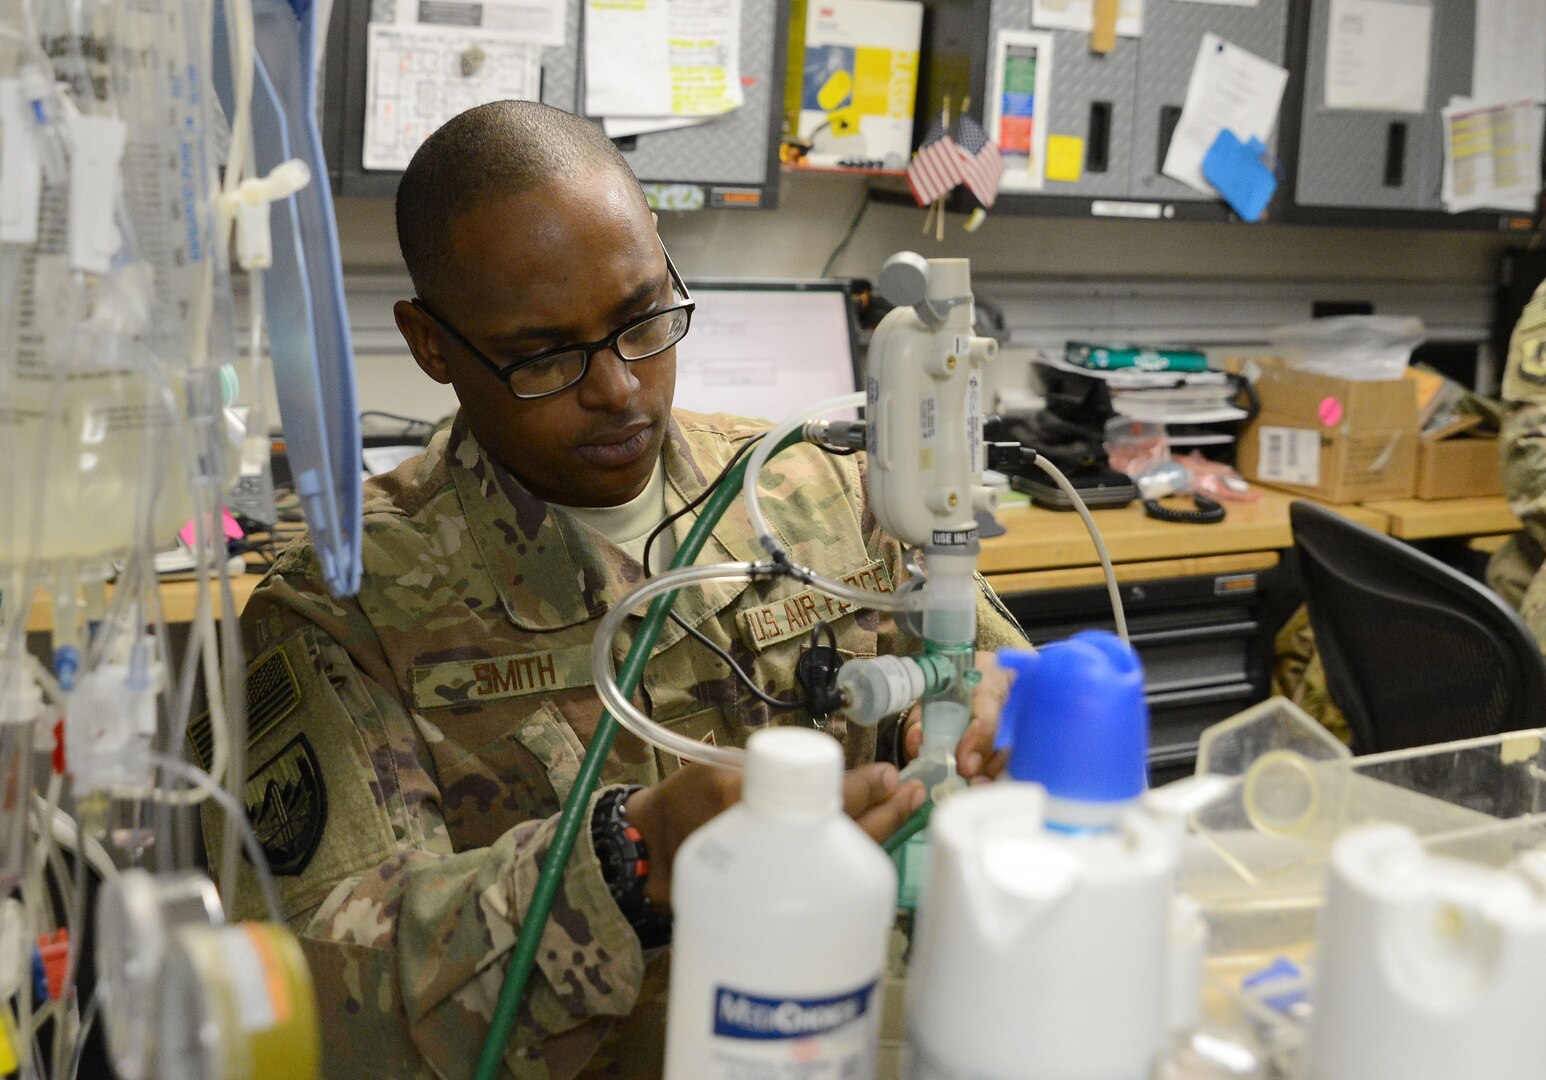 Tech. Sgt. Richard Smith, 455th Expeditionary Medical Operation Squadron clinical engineering NCOIC, repairs medical equipment Jan. 15, 2018 at Craig Joint Theater Hospital in Bagram Airfield, Afghanistan.